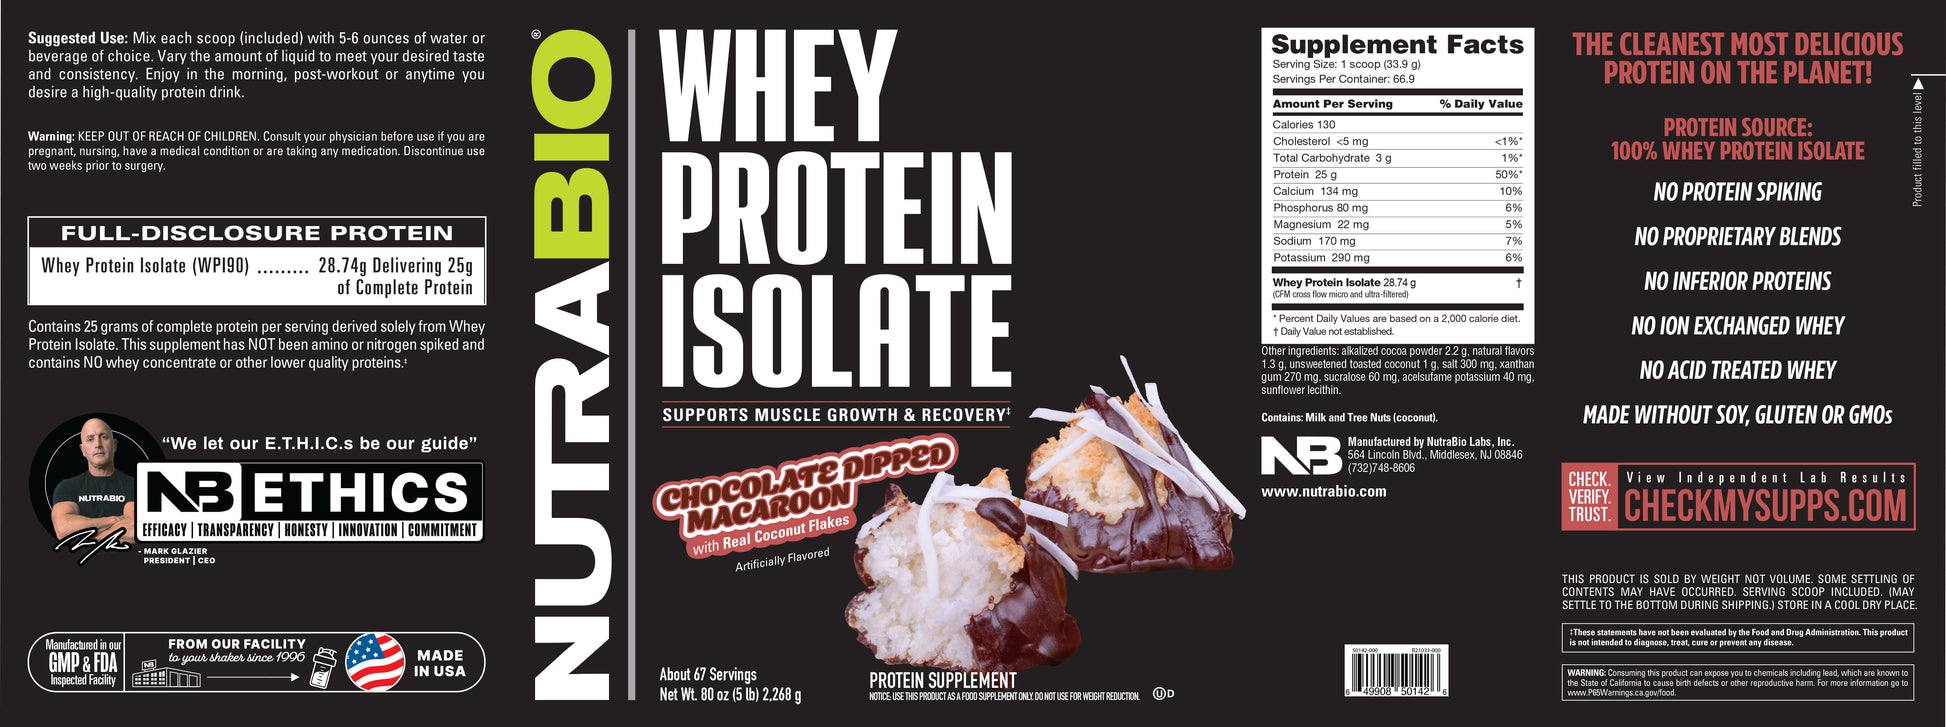 Chocolate Dipped Macaroon 5lb Whey Protein Isolate